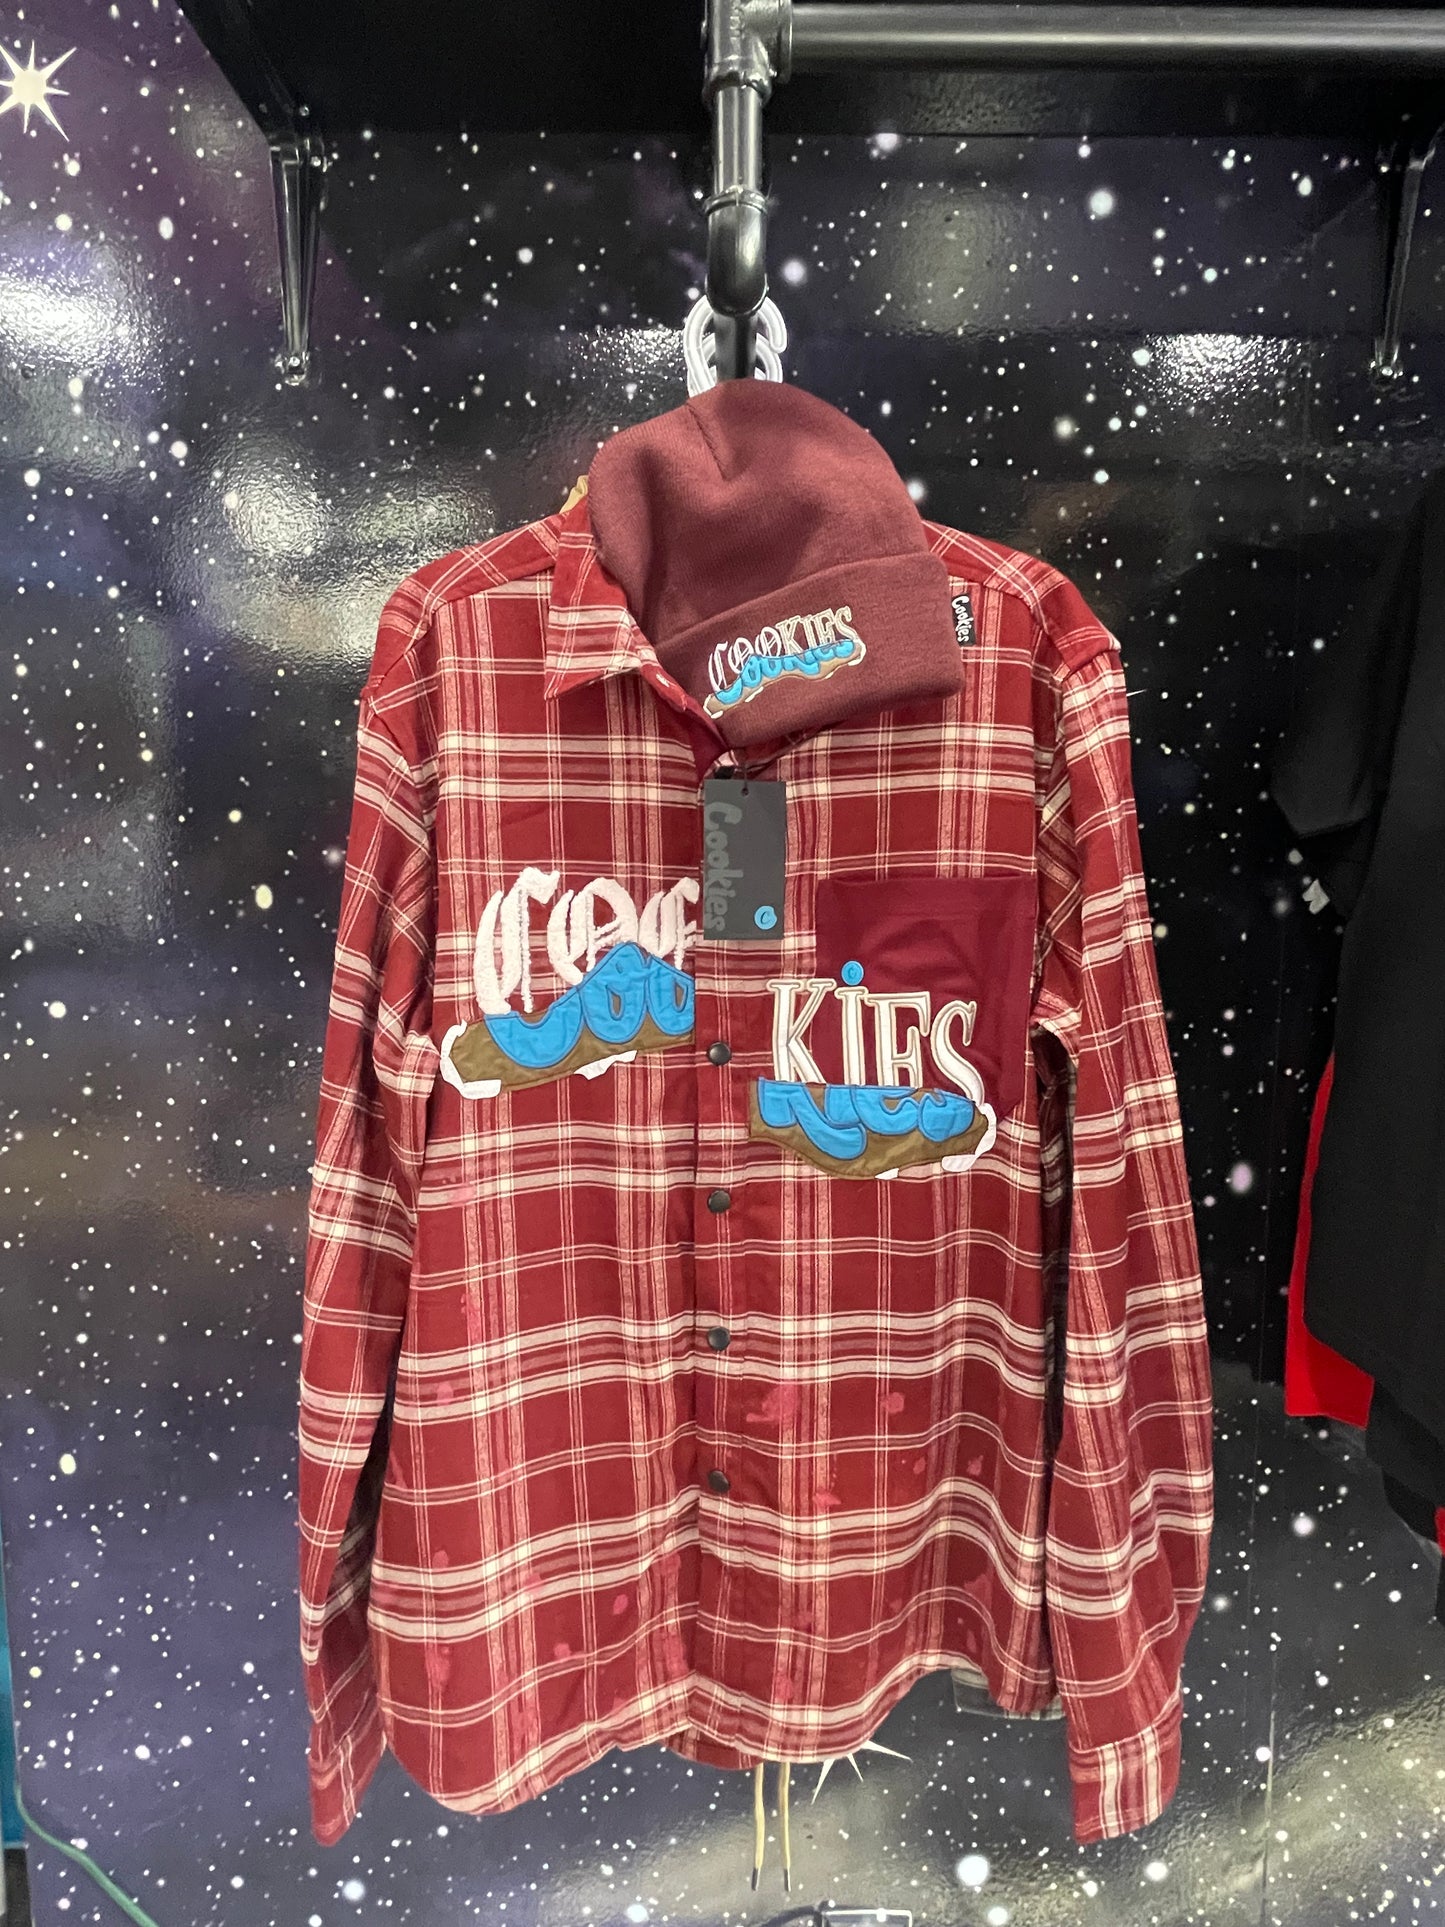 Cookies SF "upper echelon" flannel shirt with snap buttons